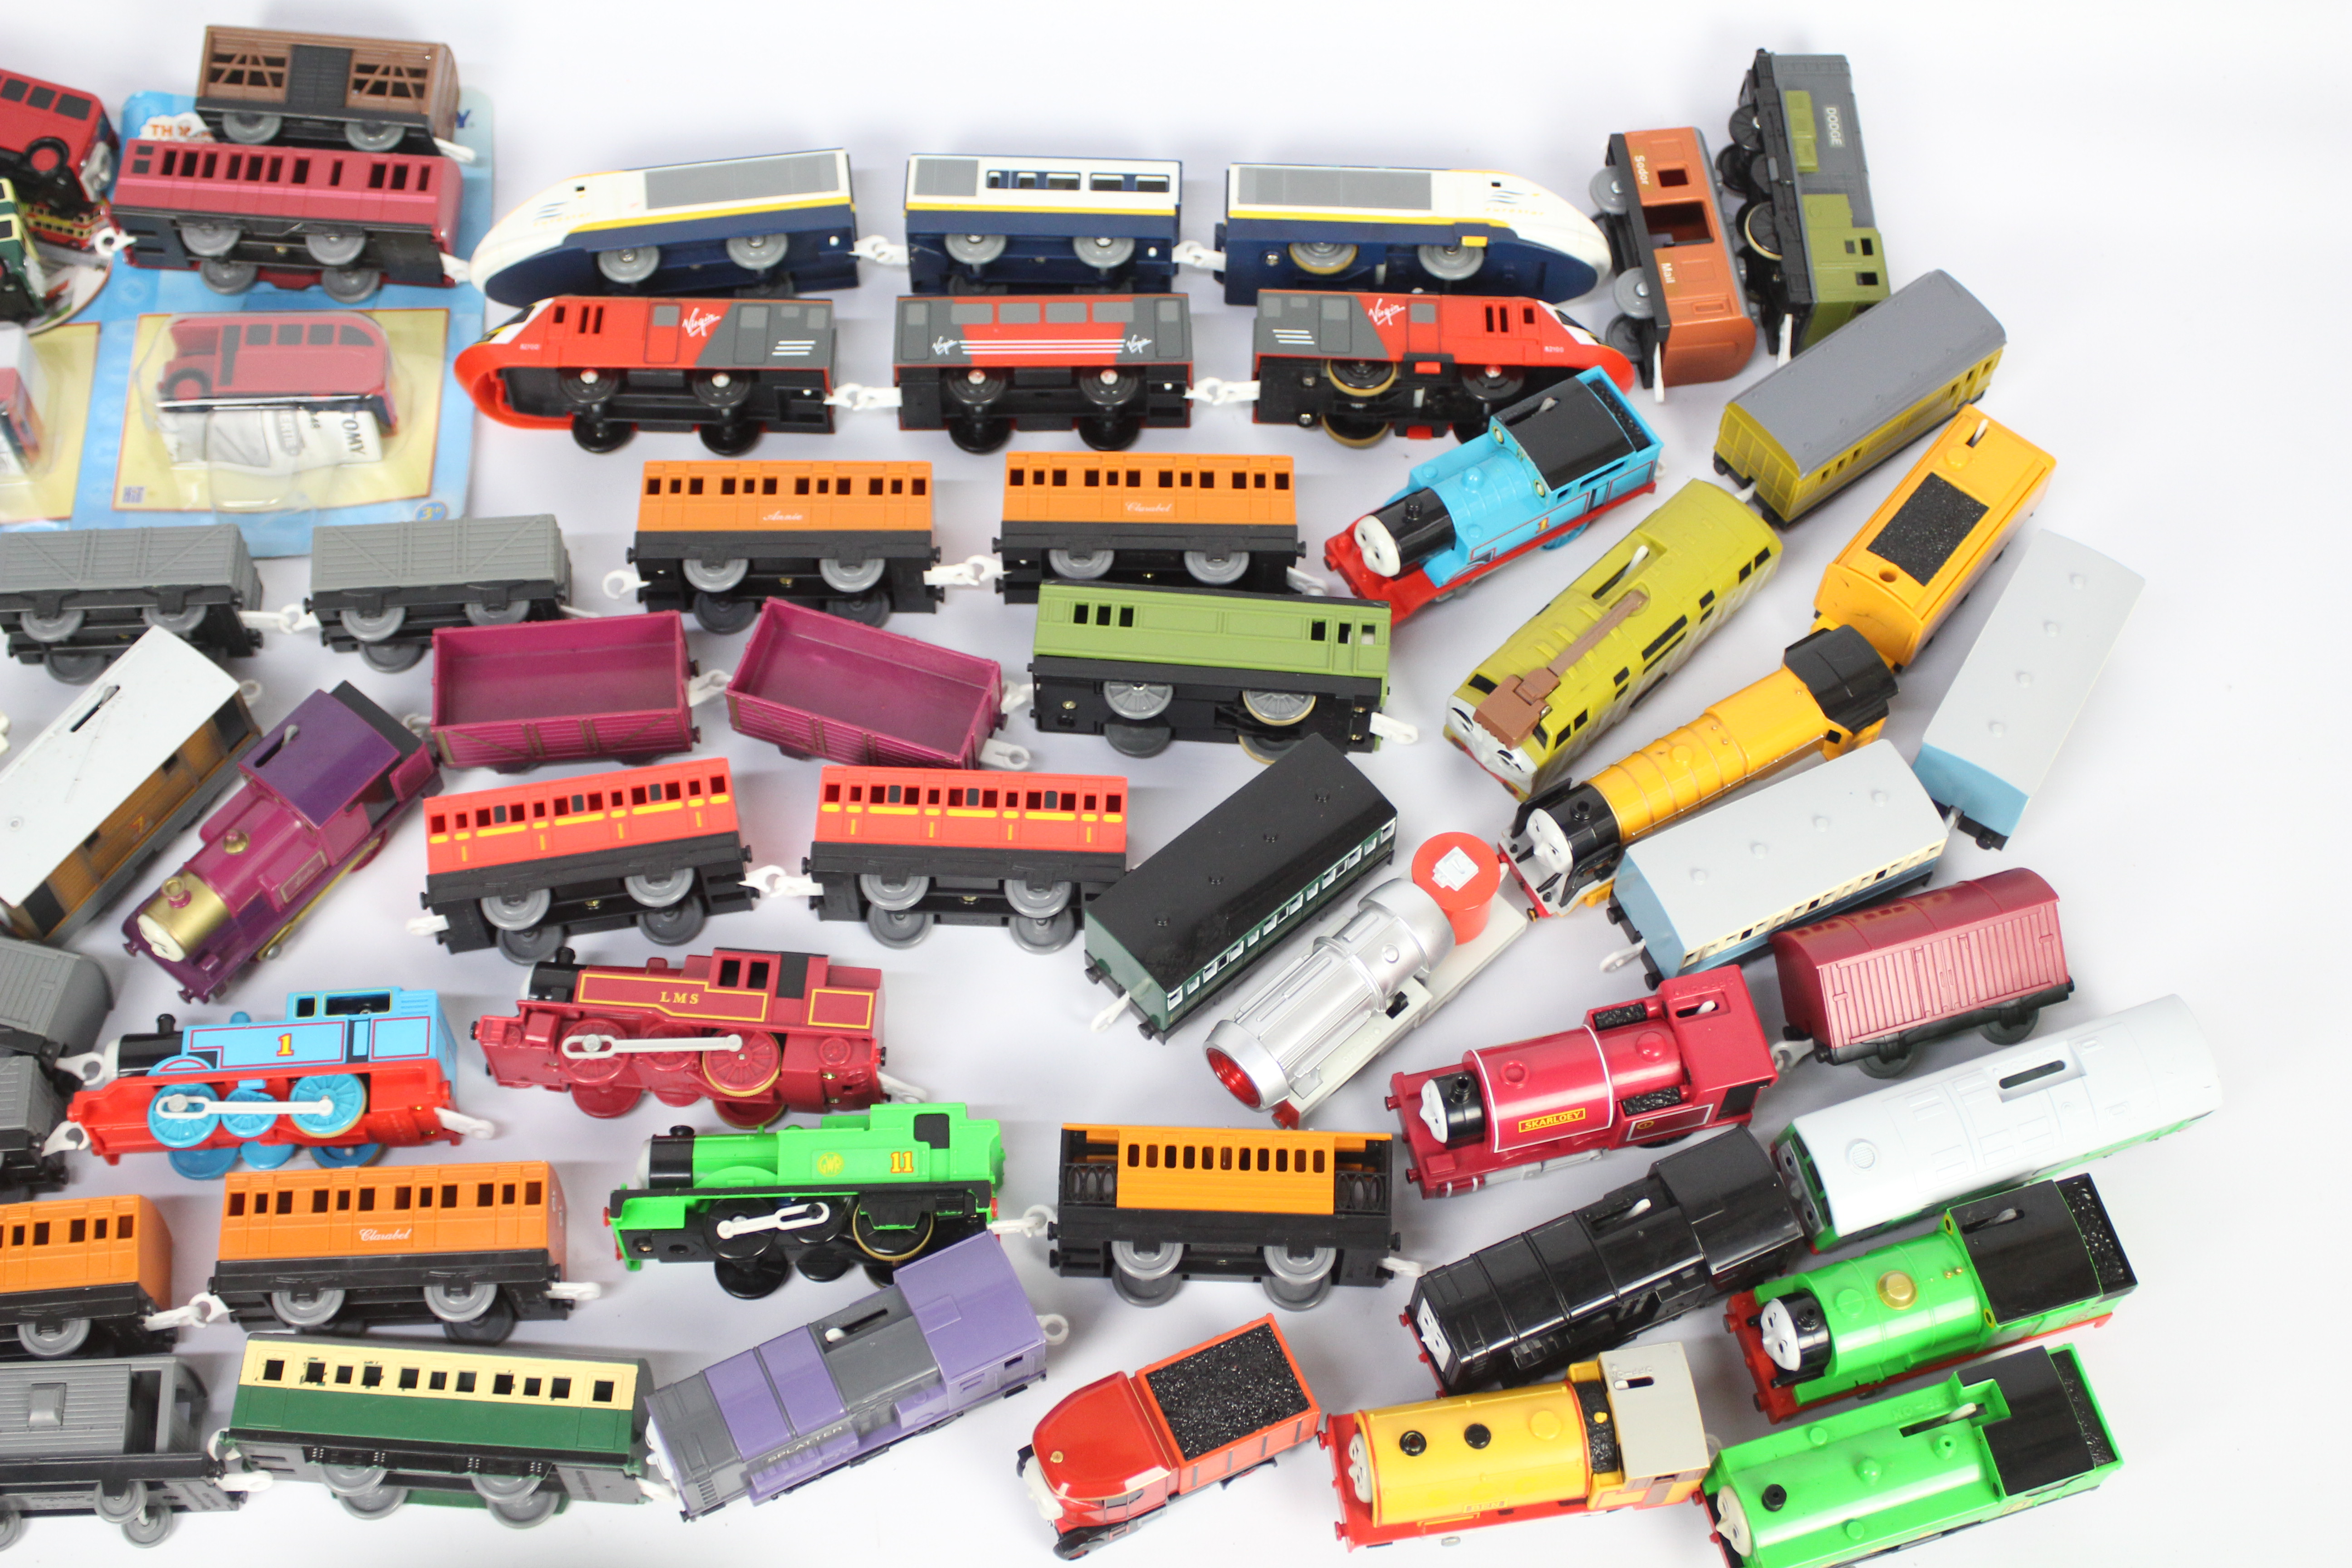 Tomy - Thomas & Friends. An excess of 40 plastic model trains (battery powered) and carriages. - Image 3 of 4